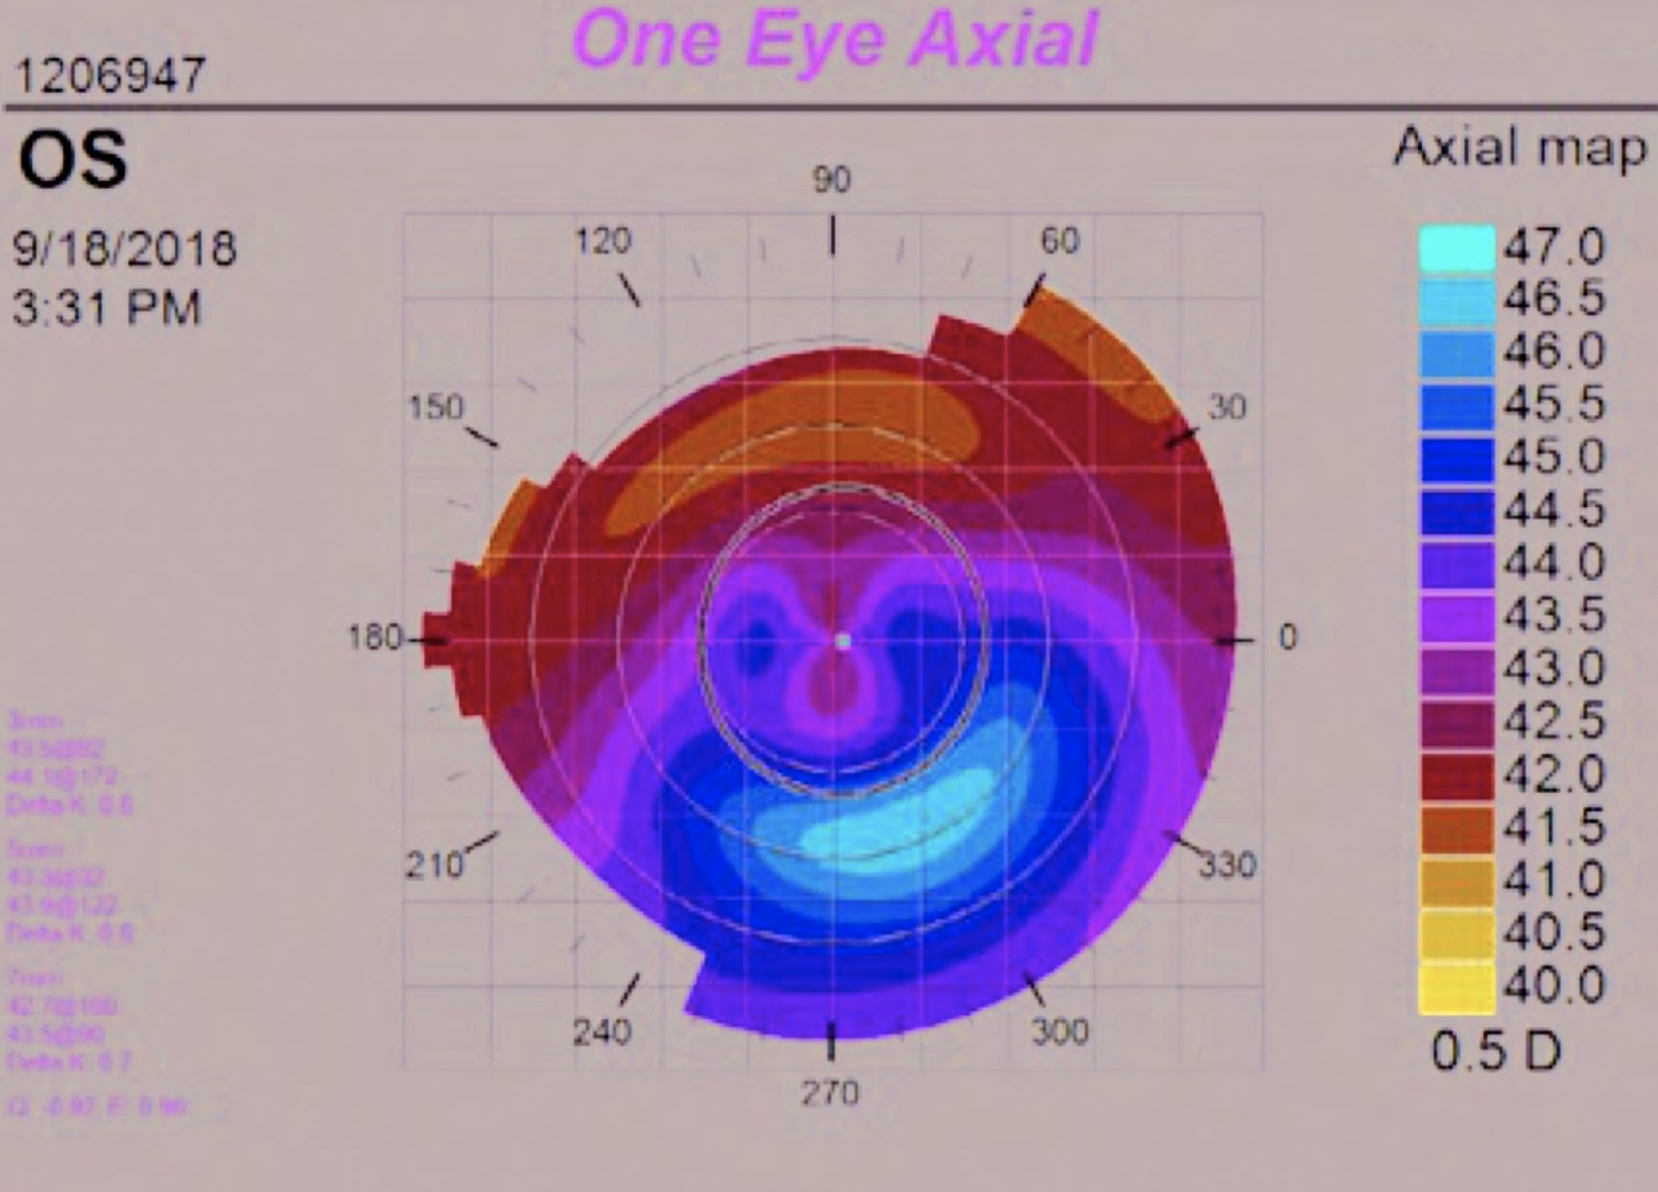 Preterm children had greater corneal ectasia, and laser treatment for ROP caused further corneal steepness and higher anterior corneal astigmatism.